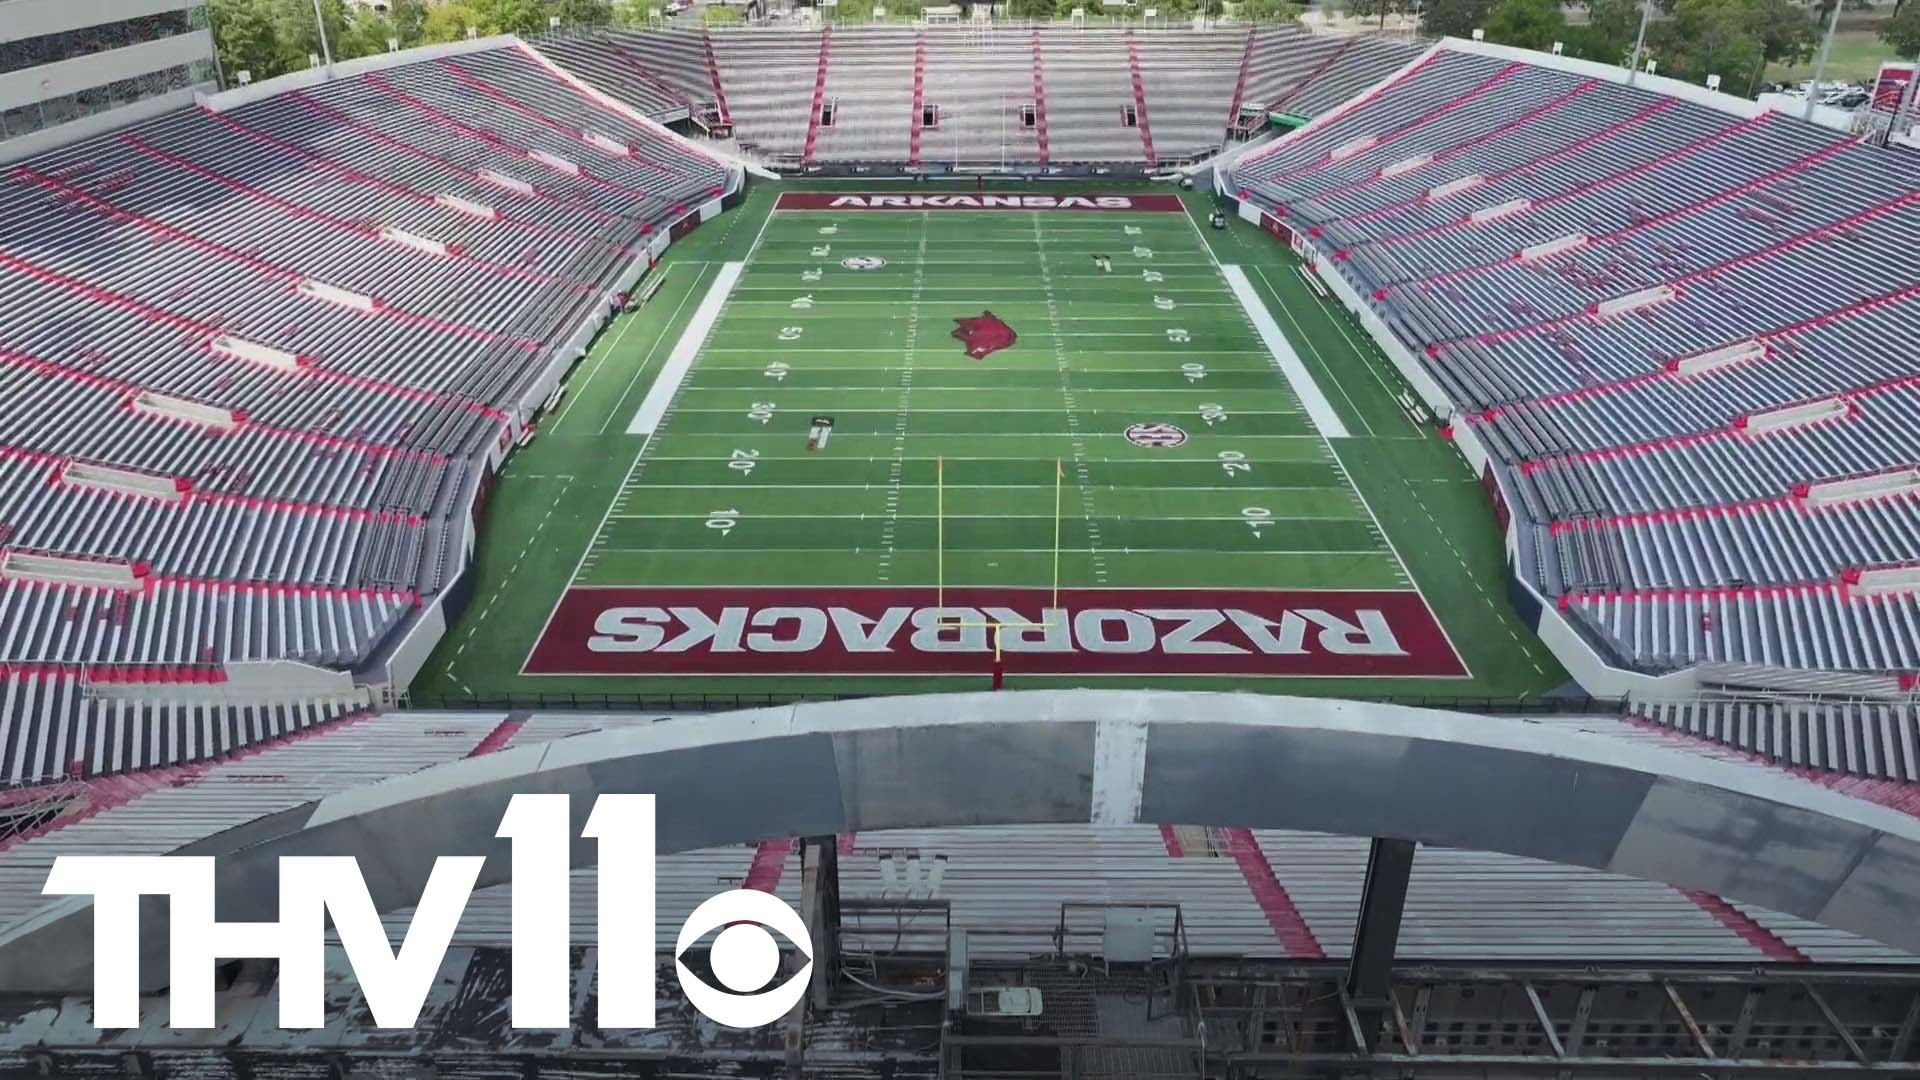 The Arkansas Razorbacks will be kicking off their season a few hours earlier than expected on Saturday at War Memorial Stadium as they take on West Carolina.